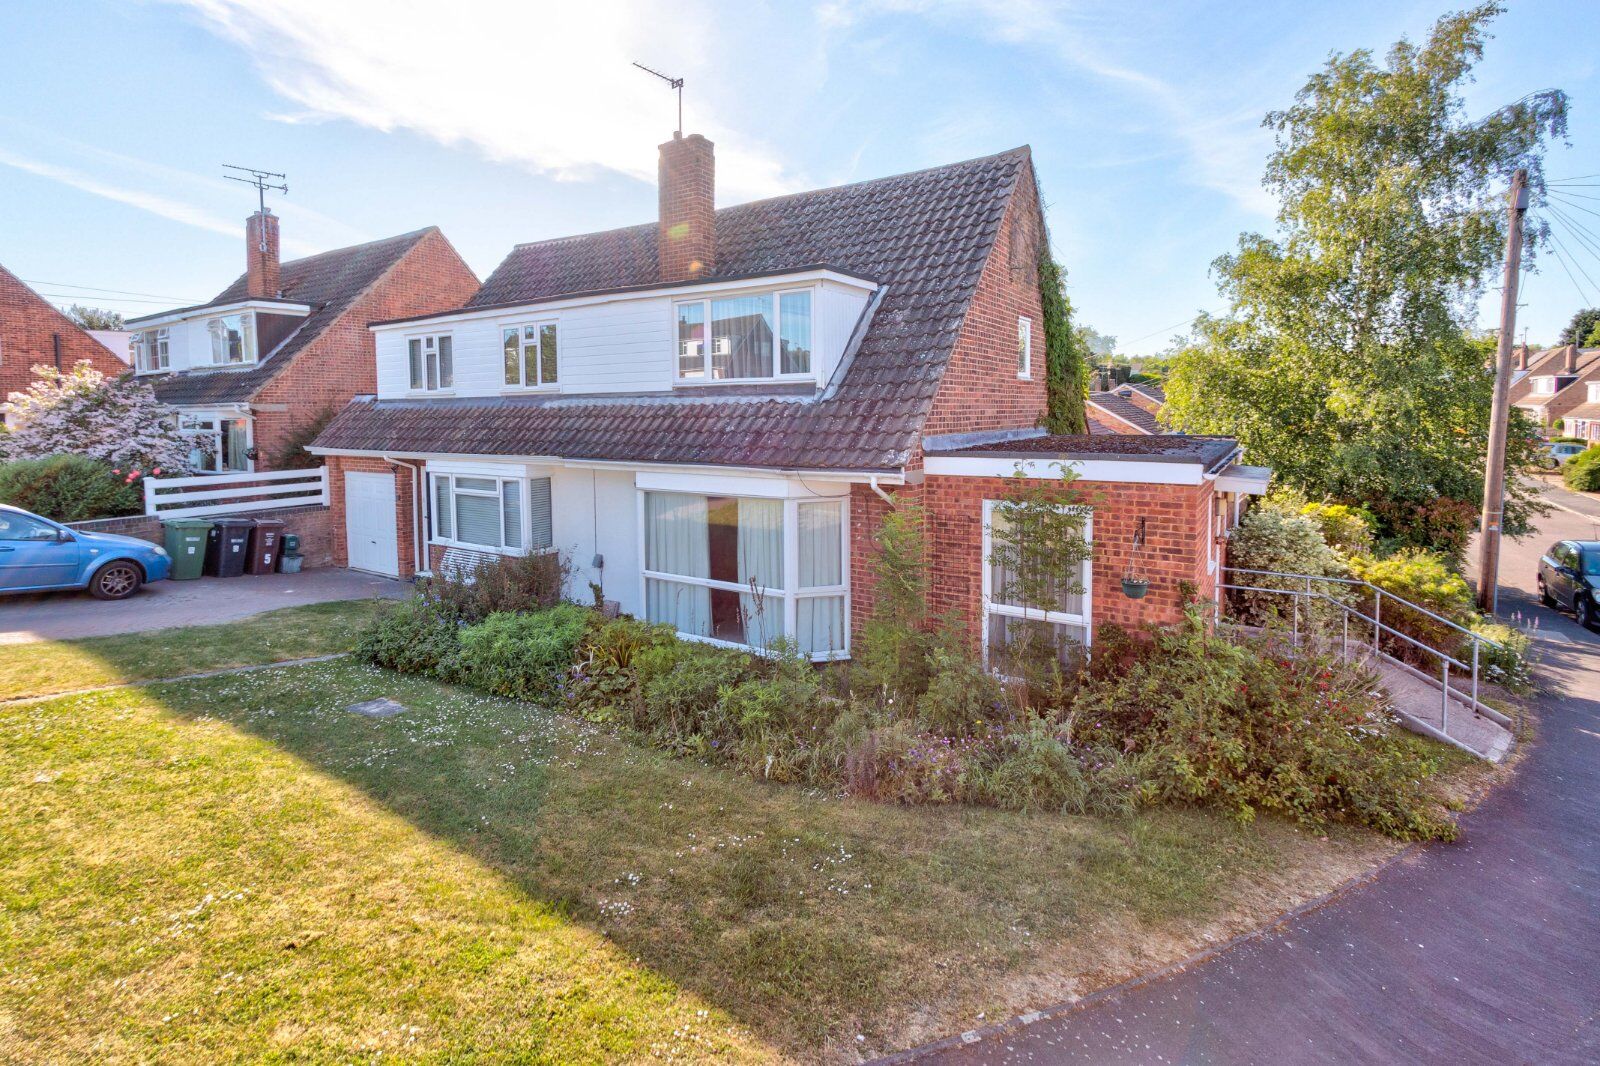 3 bedroom semi detached house for sale Chiltern Road, St. Albans, AL4, main image